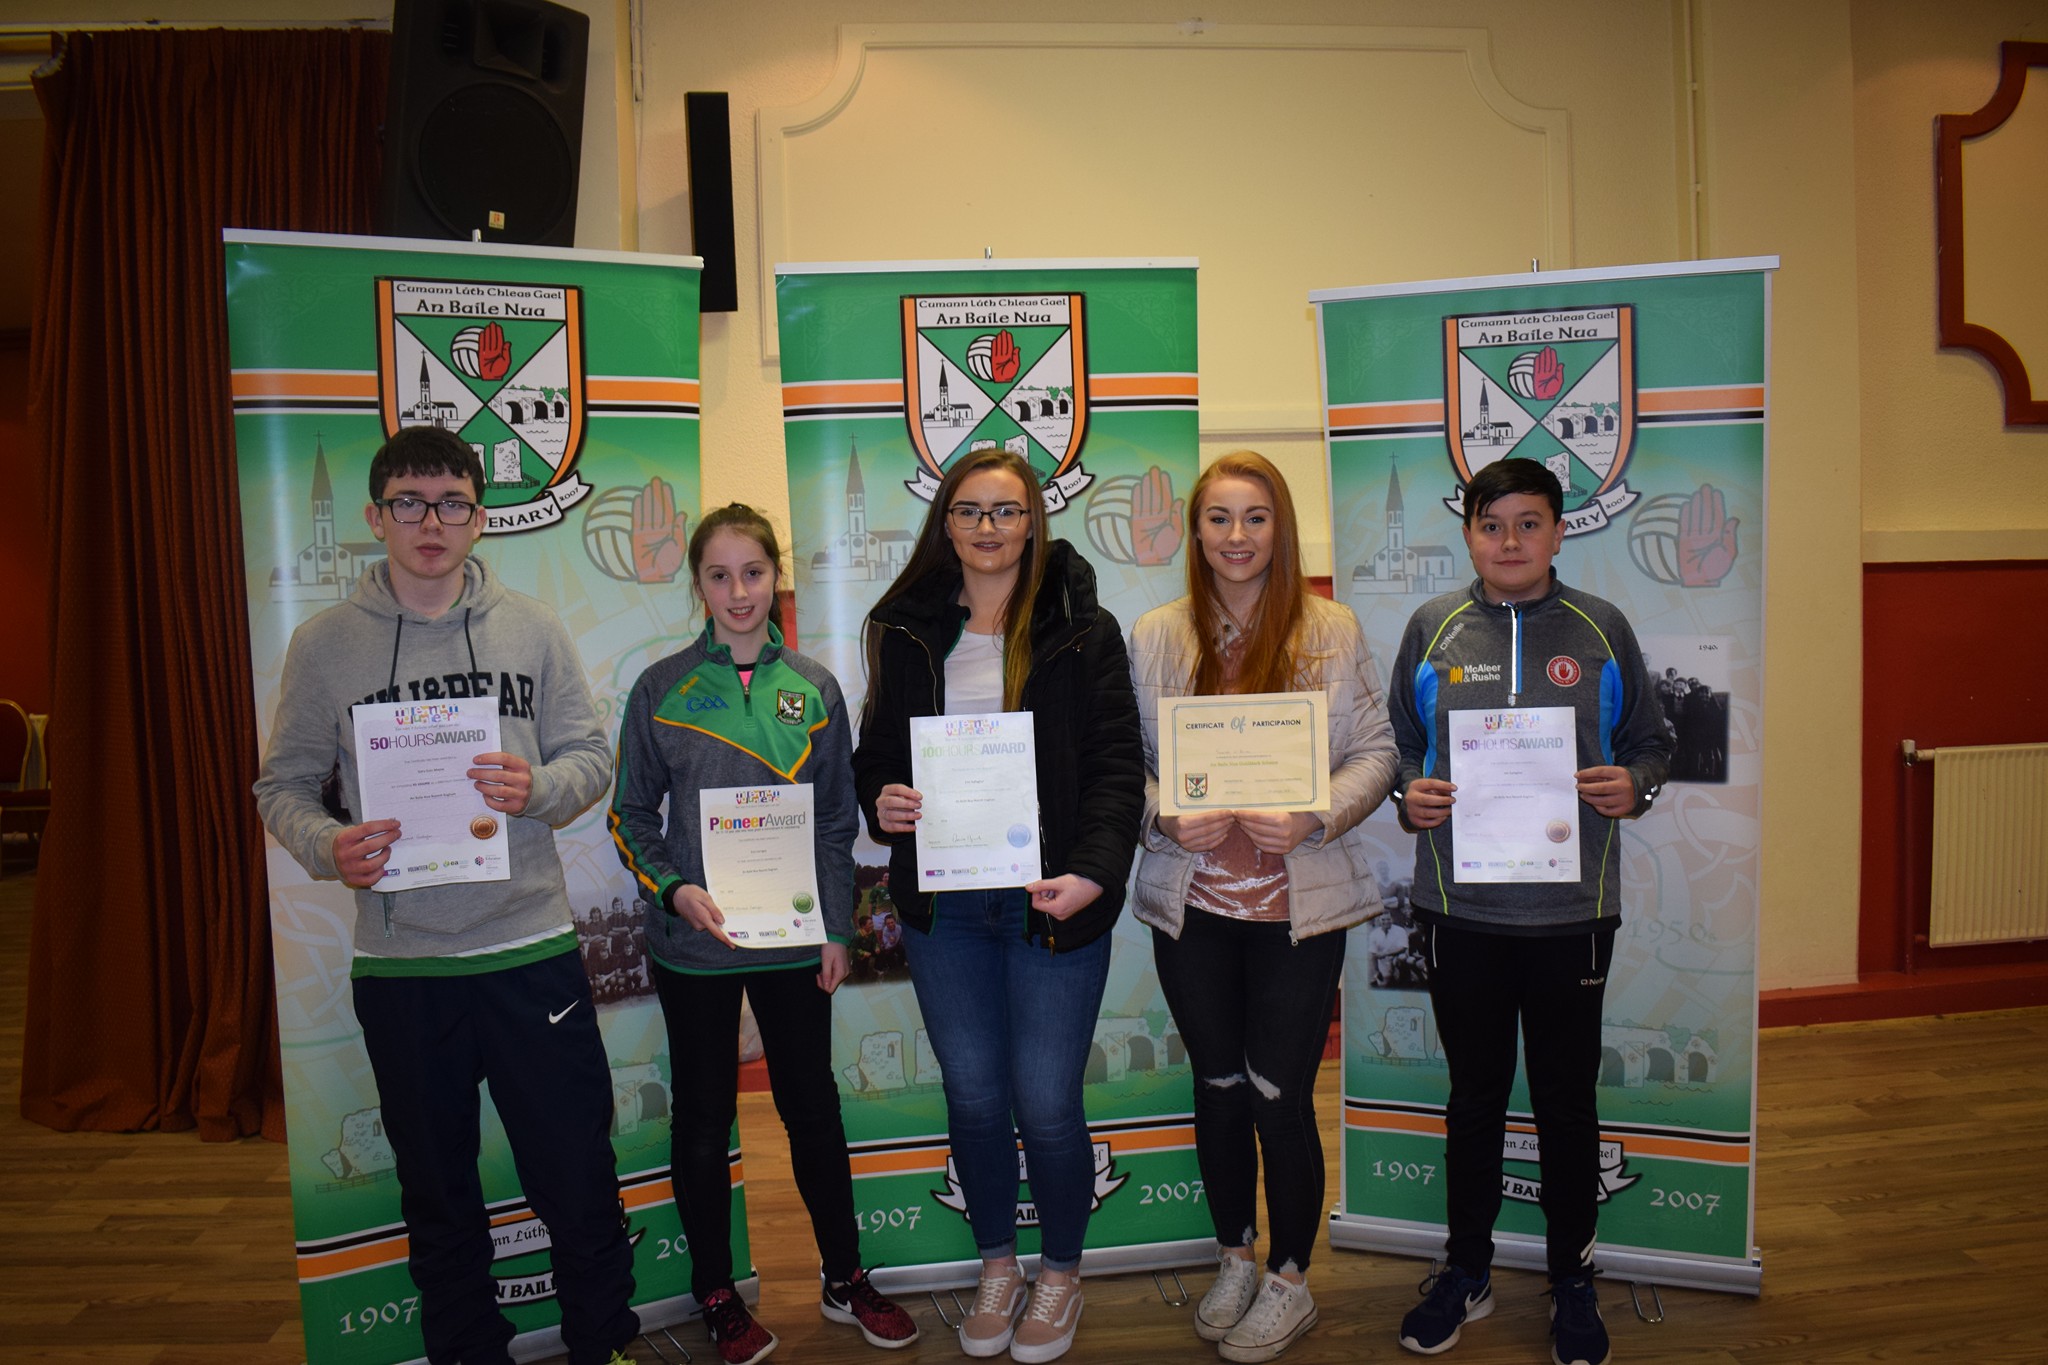 Volunteering efforts of young people recognised with GoldMark Award